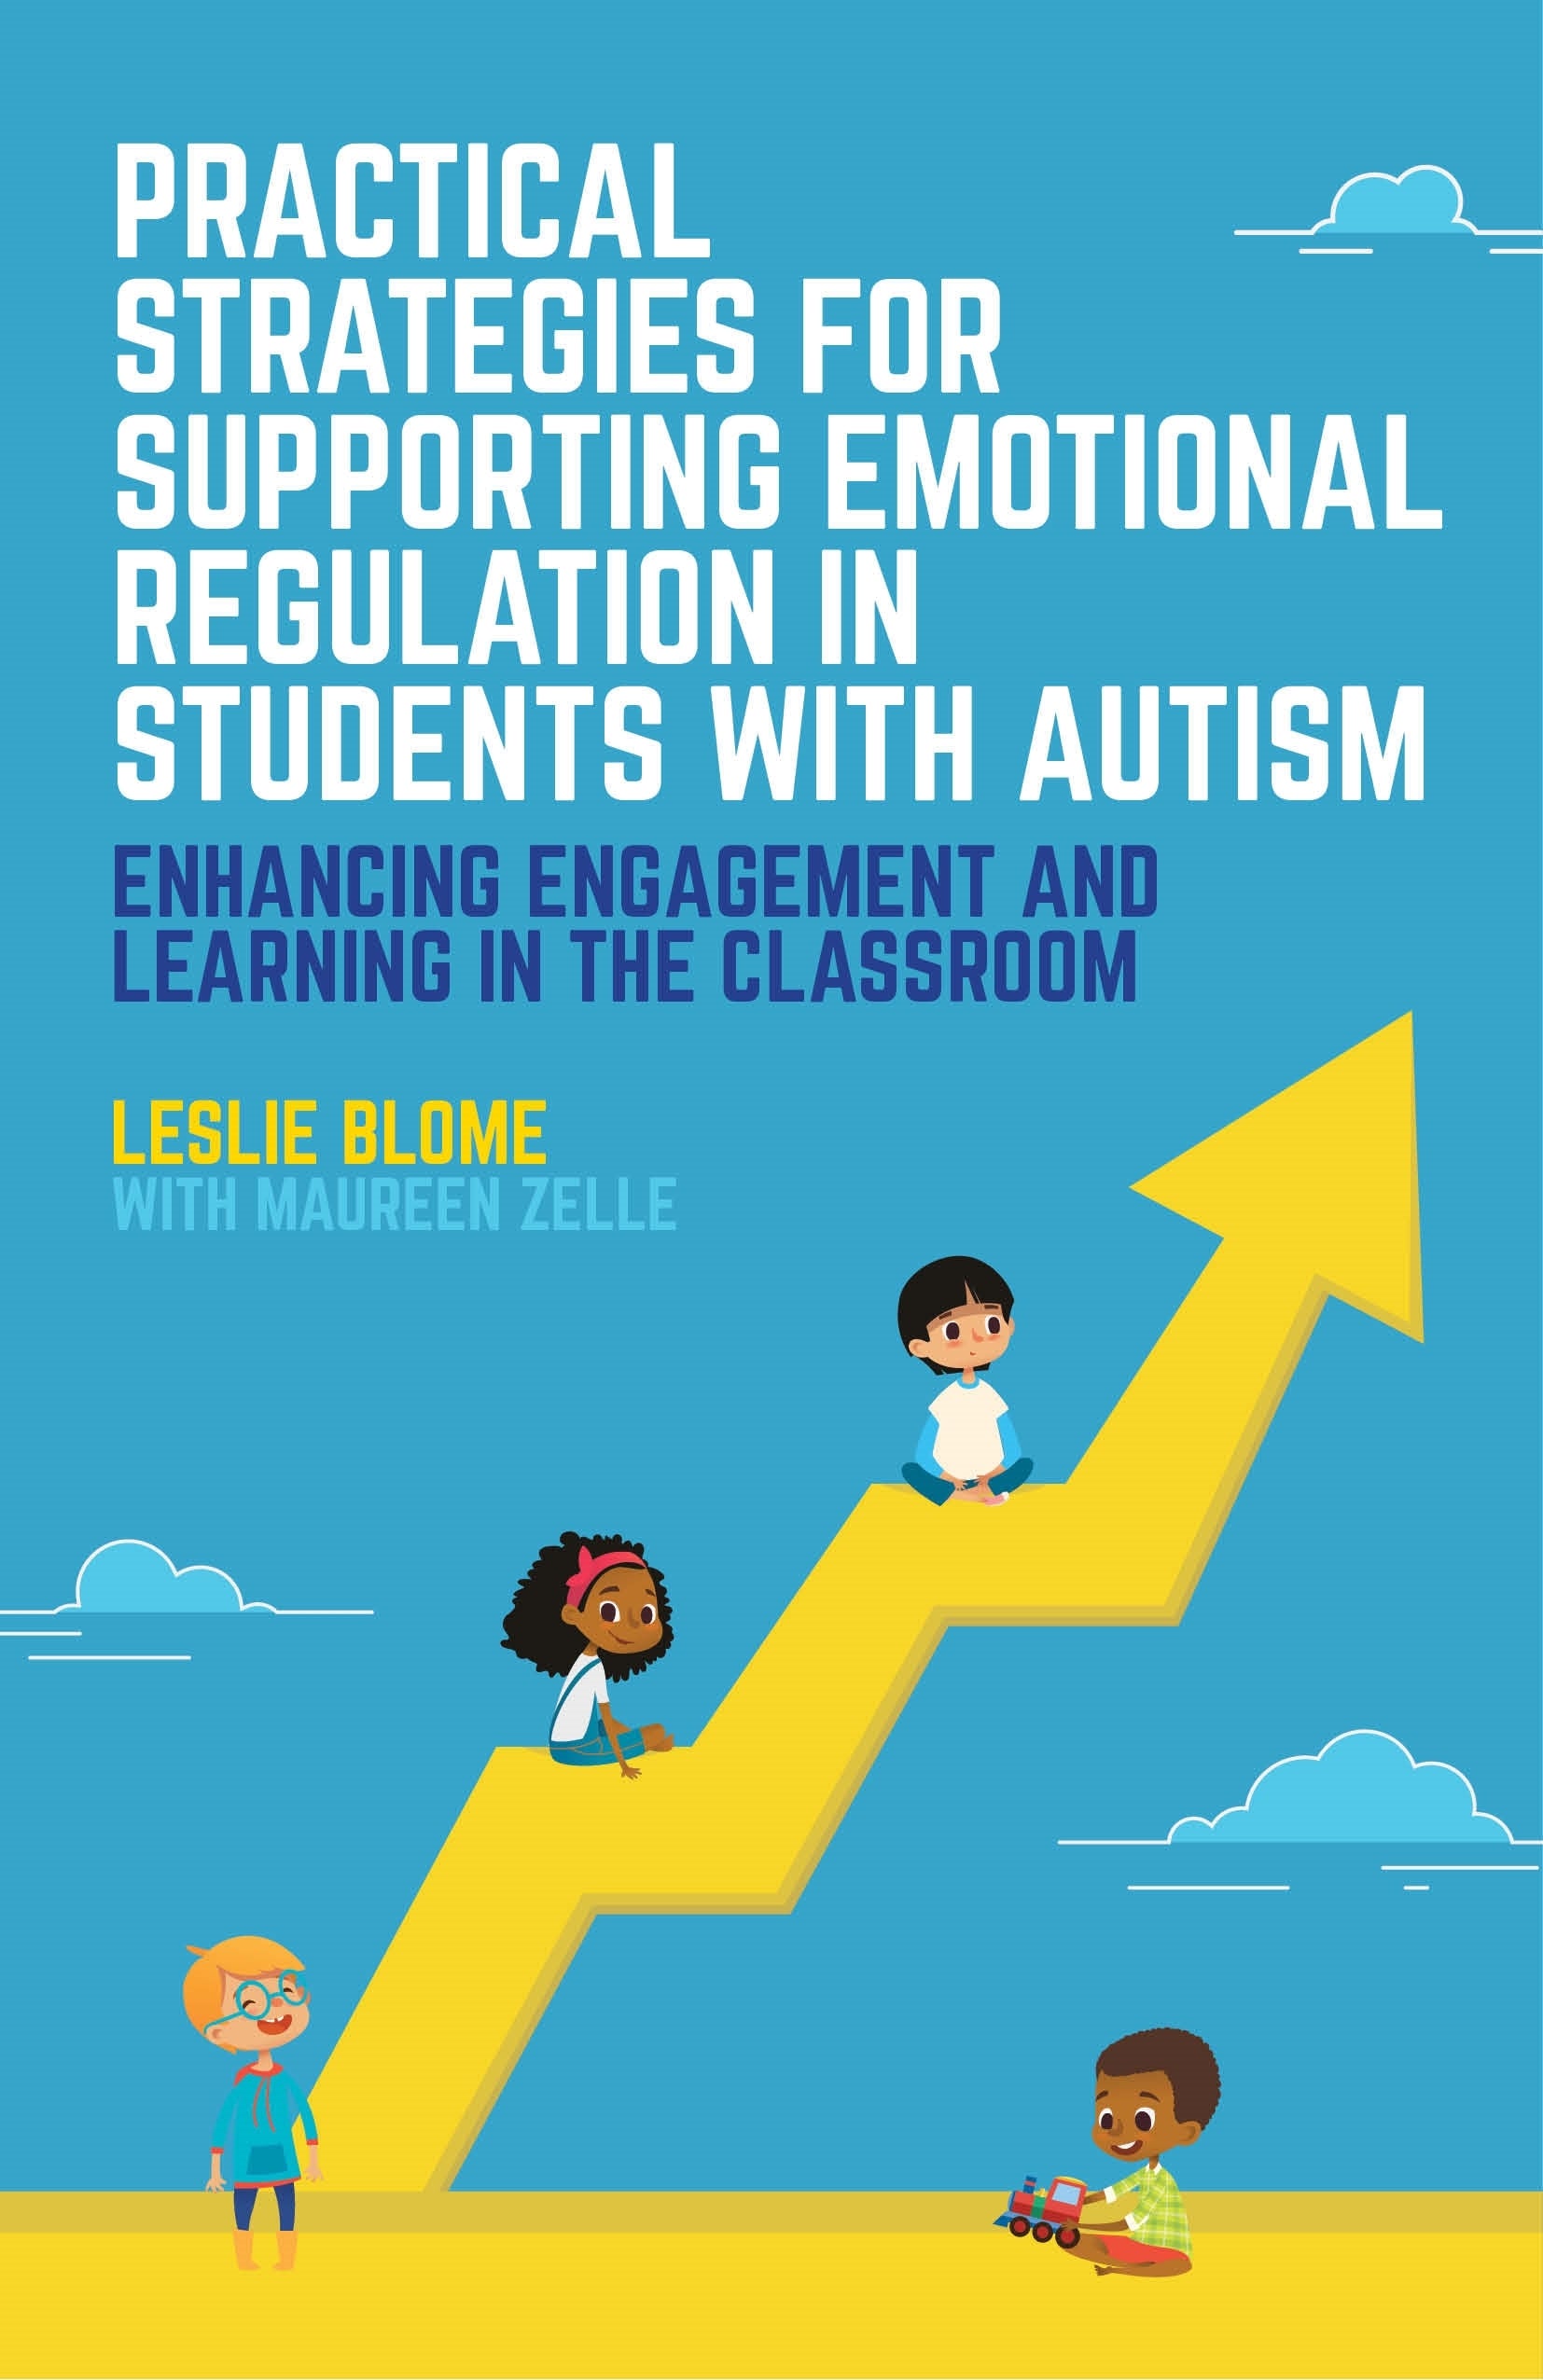 Practical Strategies for Supporting Emotional Regulation in Students with Autism by Leslie Blome